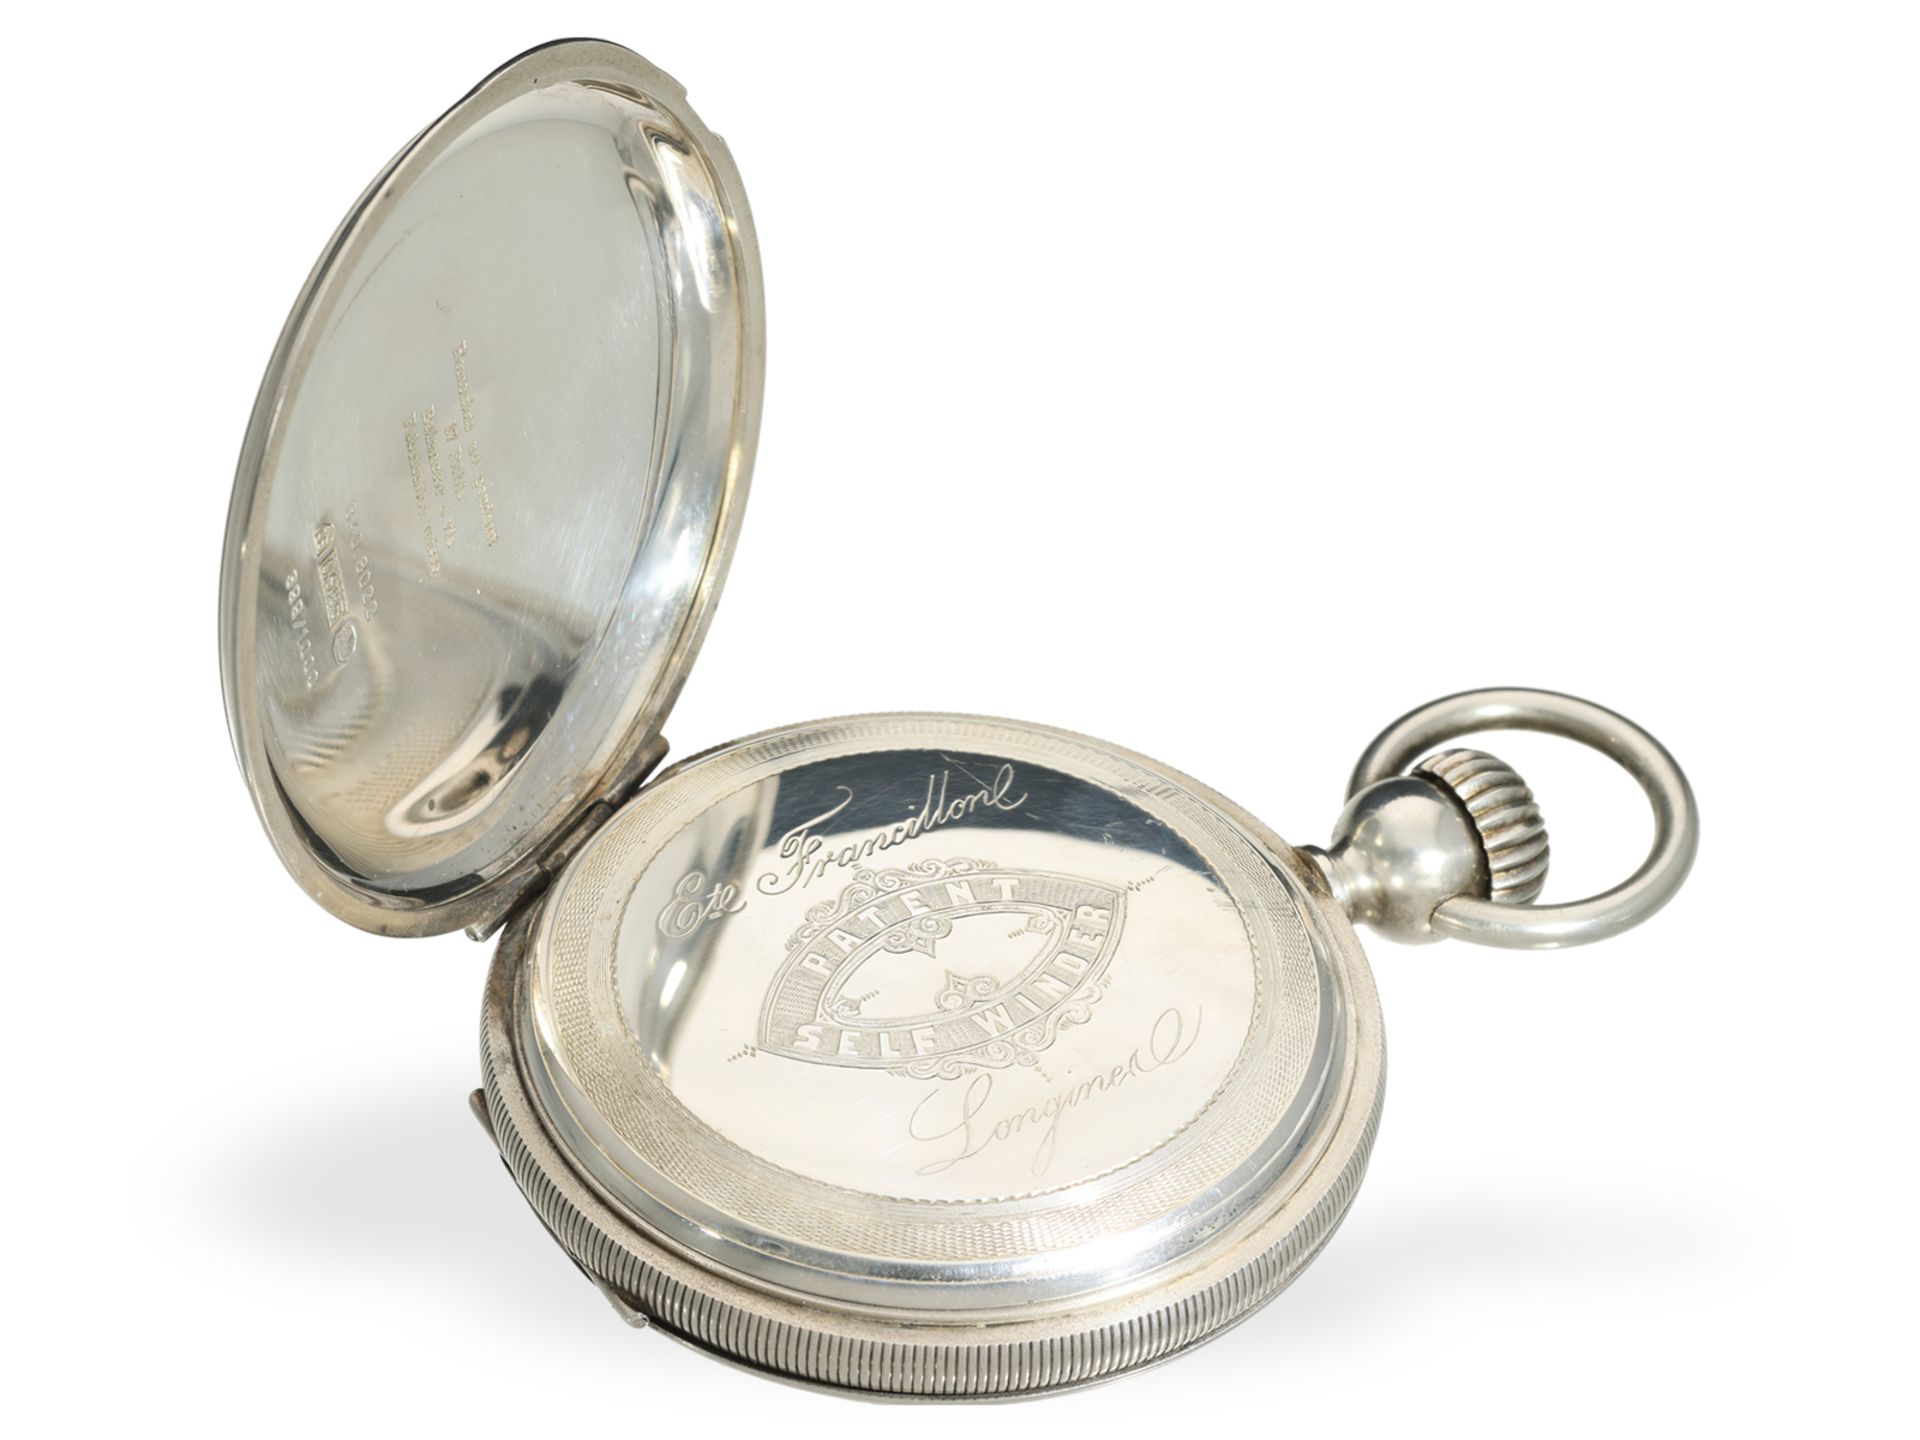 Pocket watch: rare, limited Longines Ernest Francillon 125th "1867" Ref. 840.8022, 399/1000 - Image 6 of 7